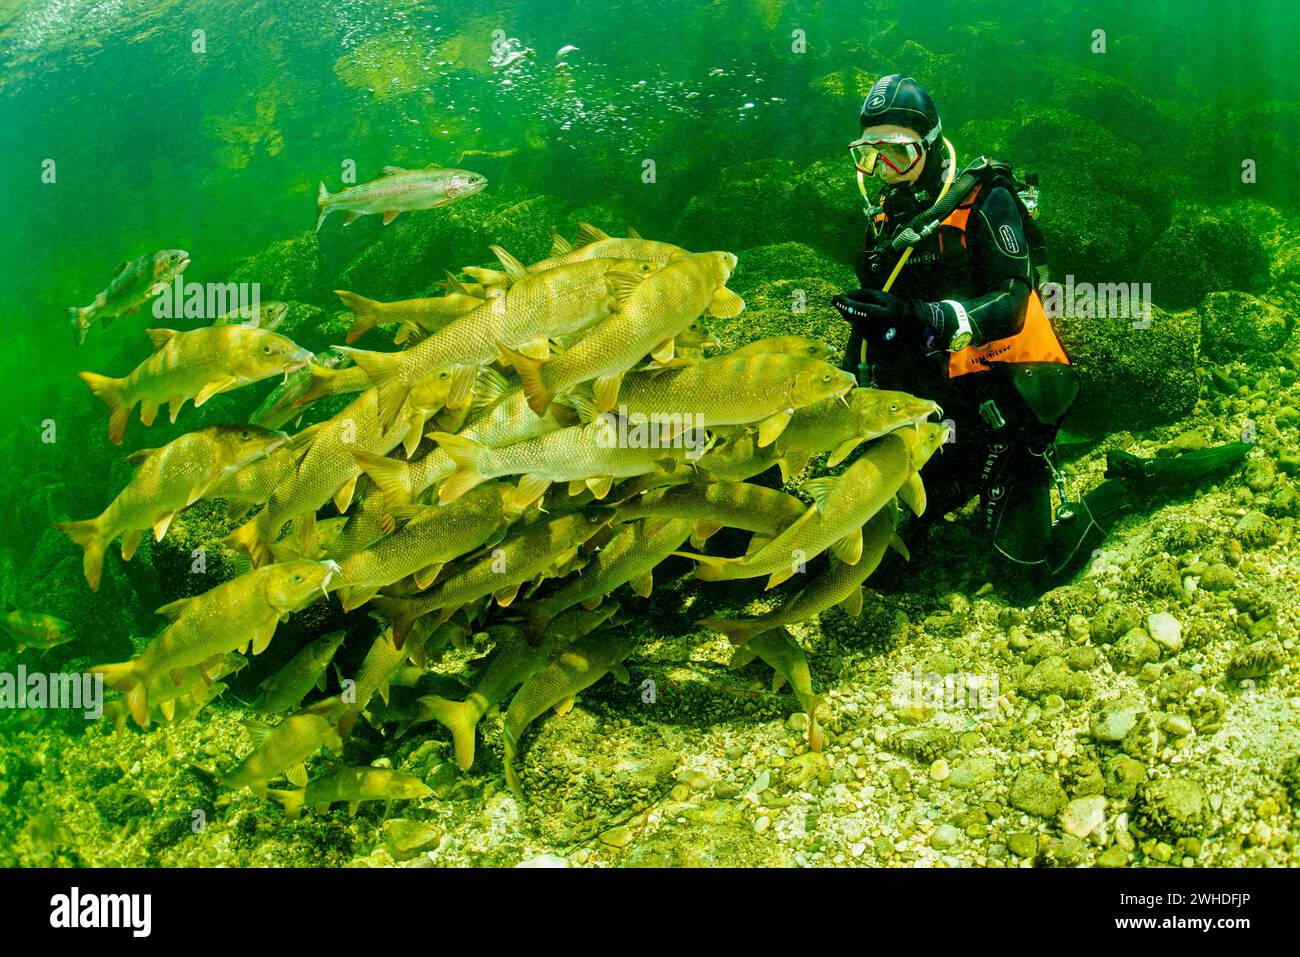 Diver playing with a school of barbels in the Traun, Austria Stock Photo